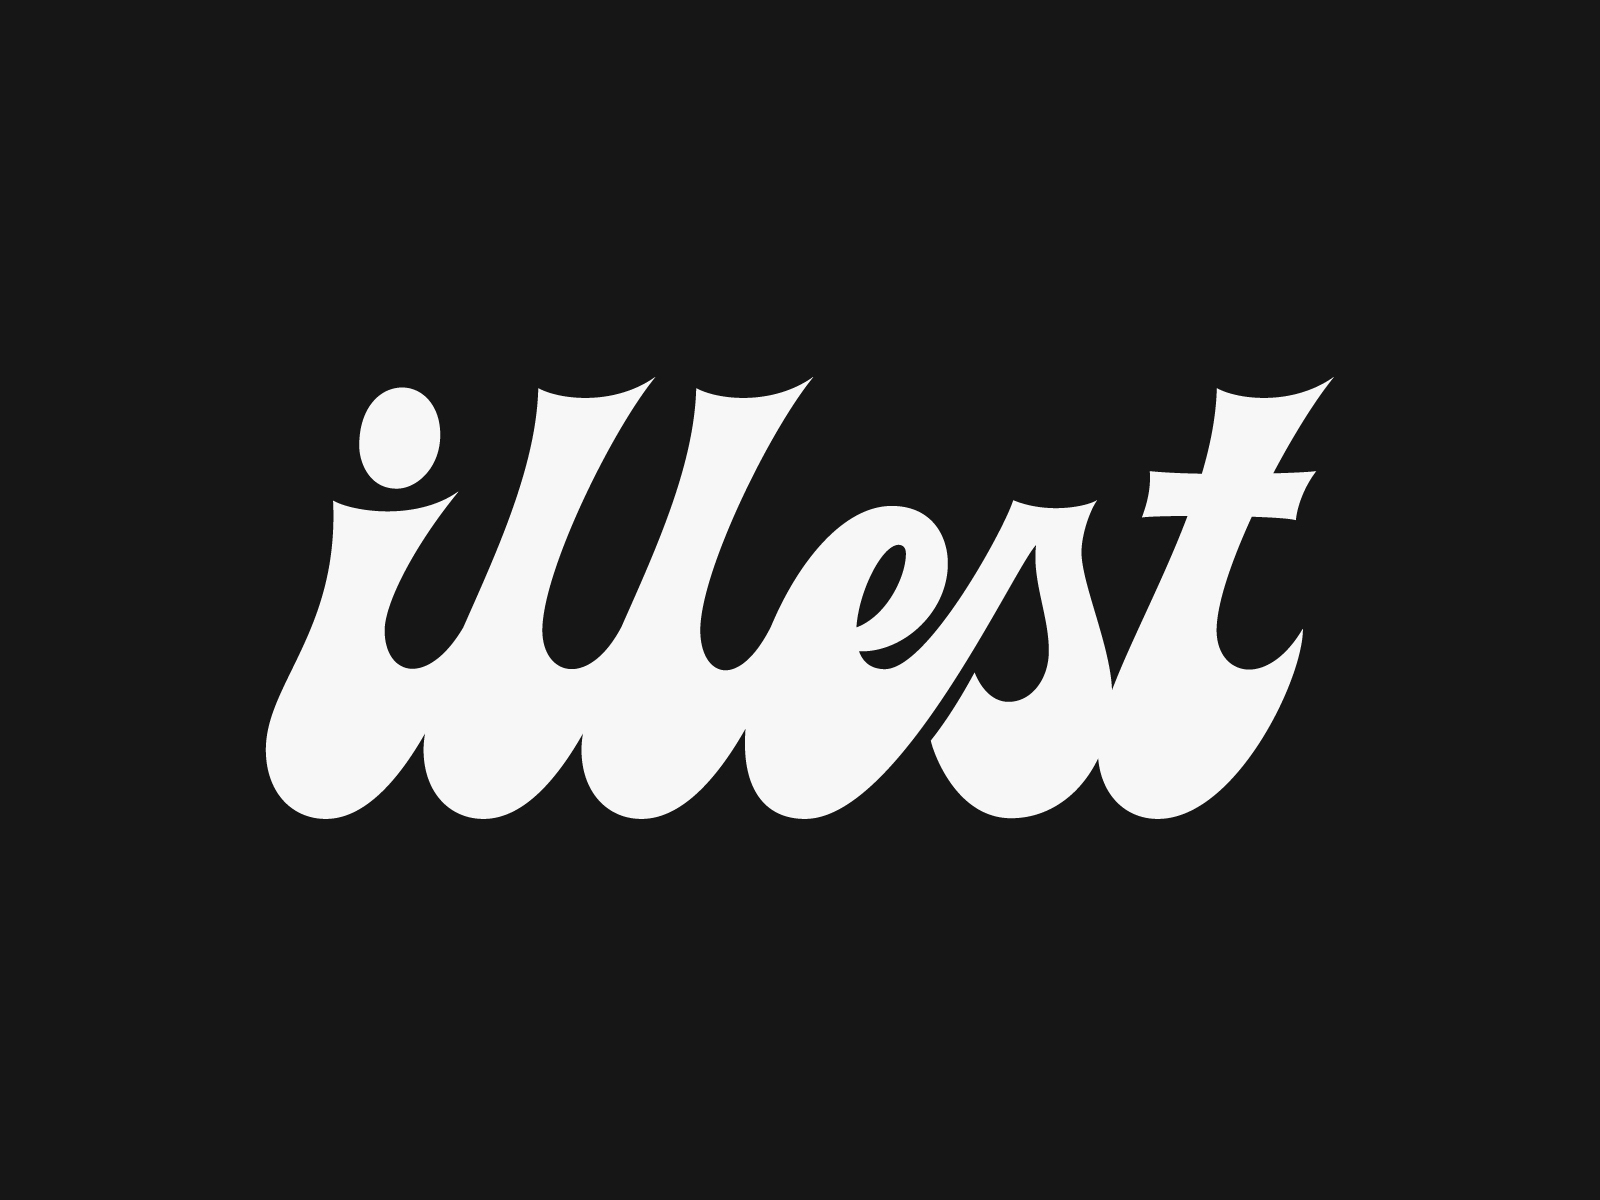 Illest by Miguel Spinola on Dribbble